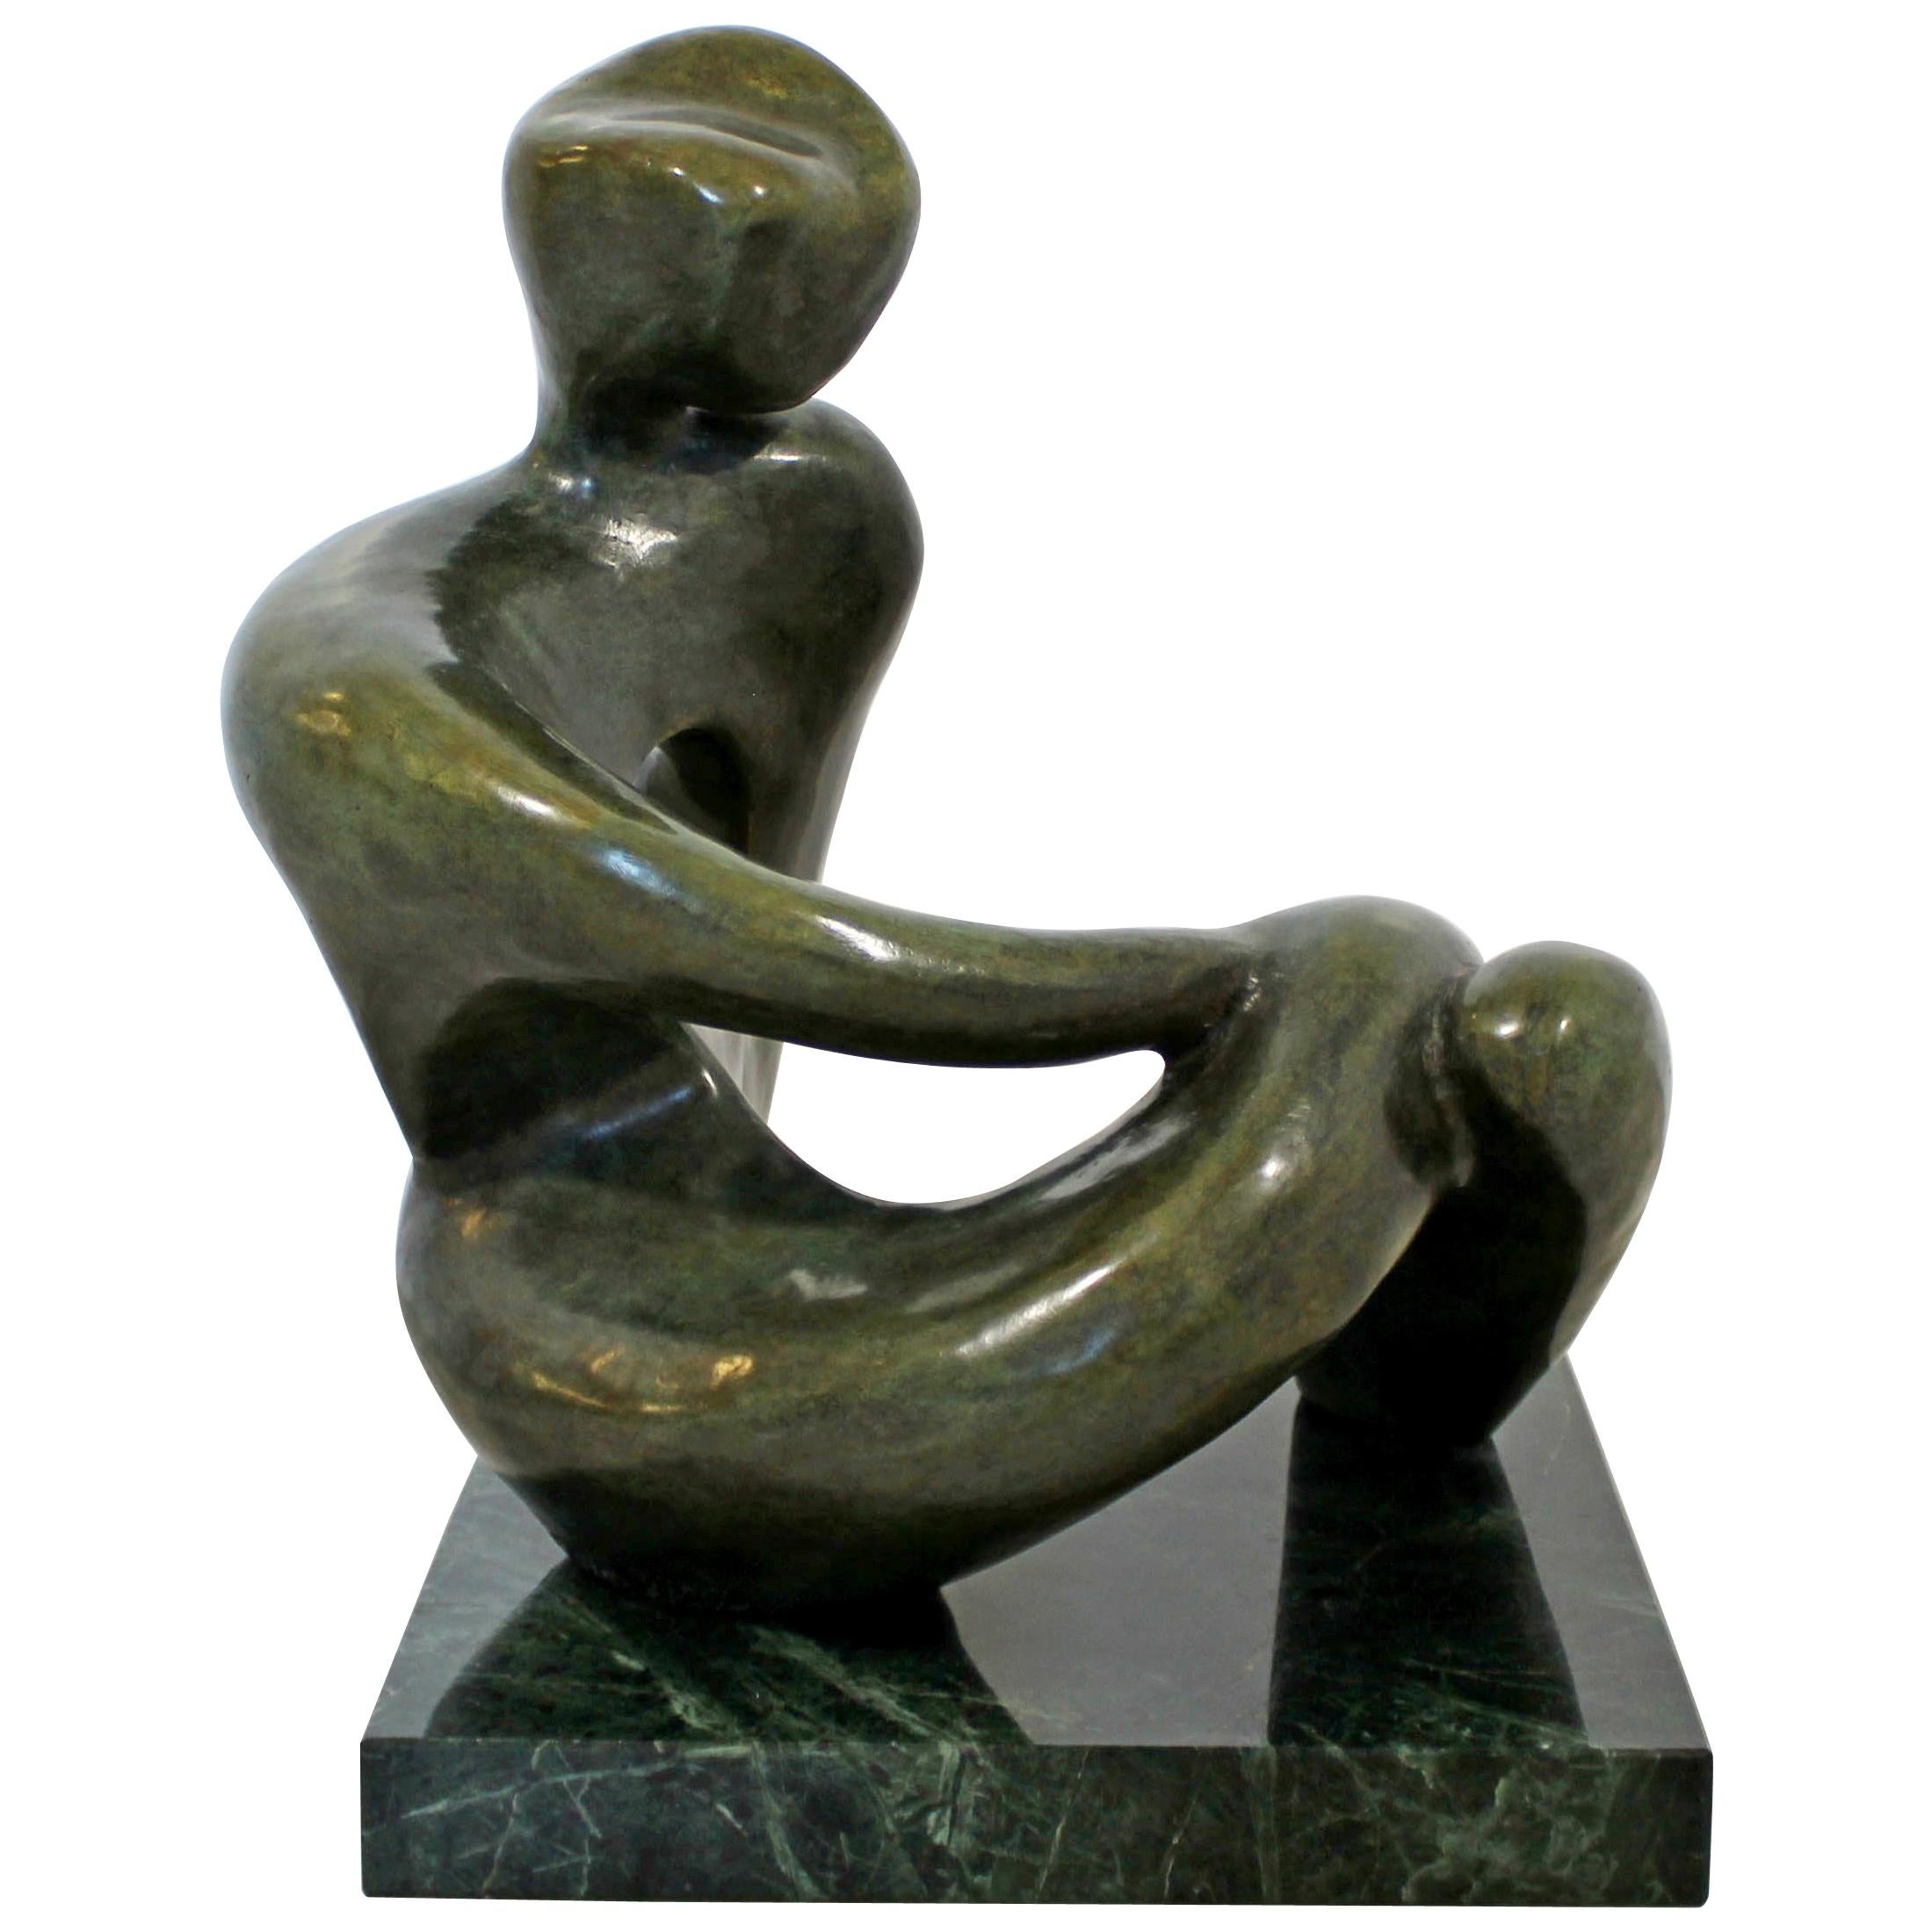 Contemporary Modern Bronze Marble Table Sculpture Signed Porret Manifesto, 1987